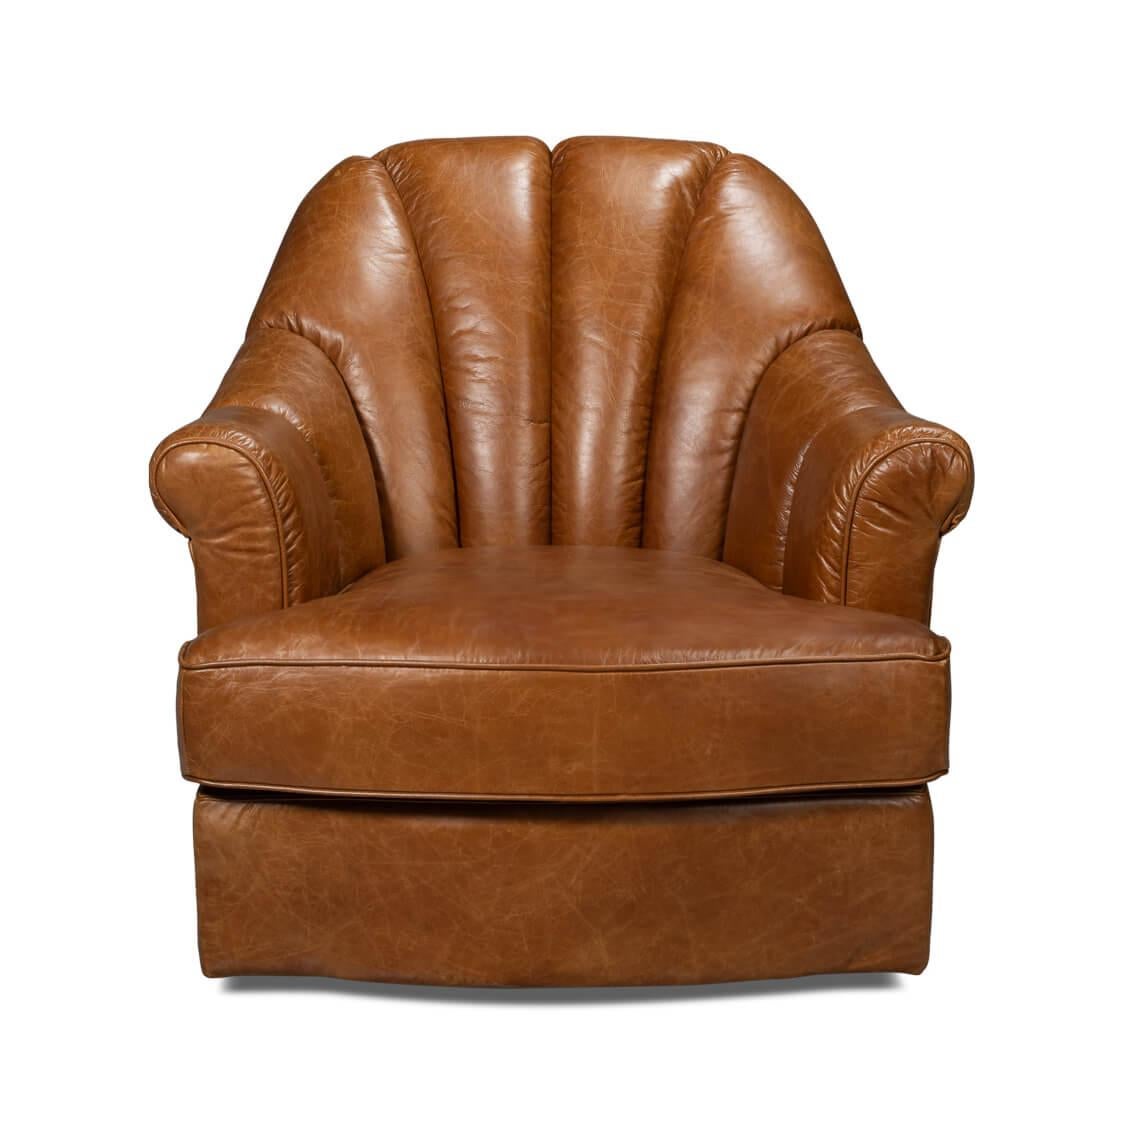 
A haven of relaxation where classic design meets cloud-like comfort. With its generously padded, rolled armrests and deep, inviting seat cushion, this chair is a call to leisure, crafted in premium full-grain Cuba Brown medium leather that exudes